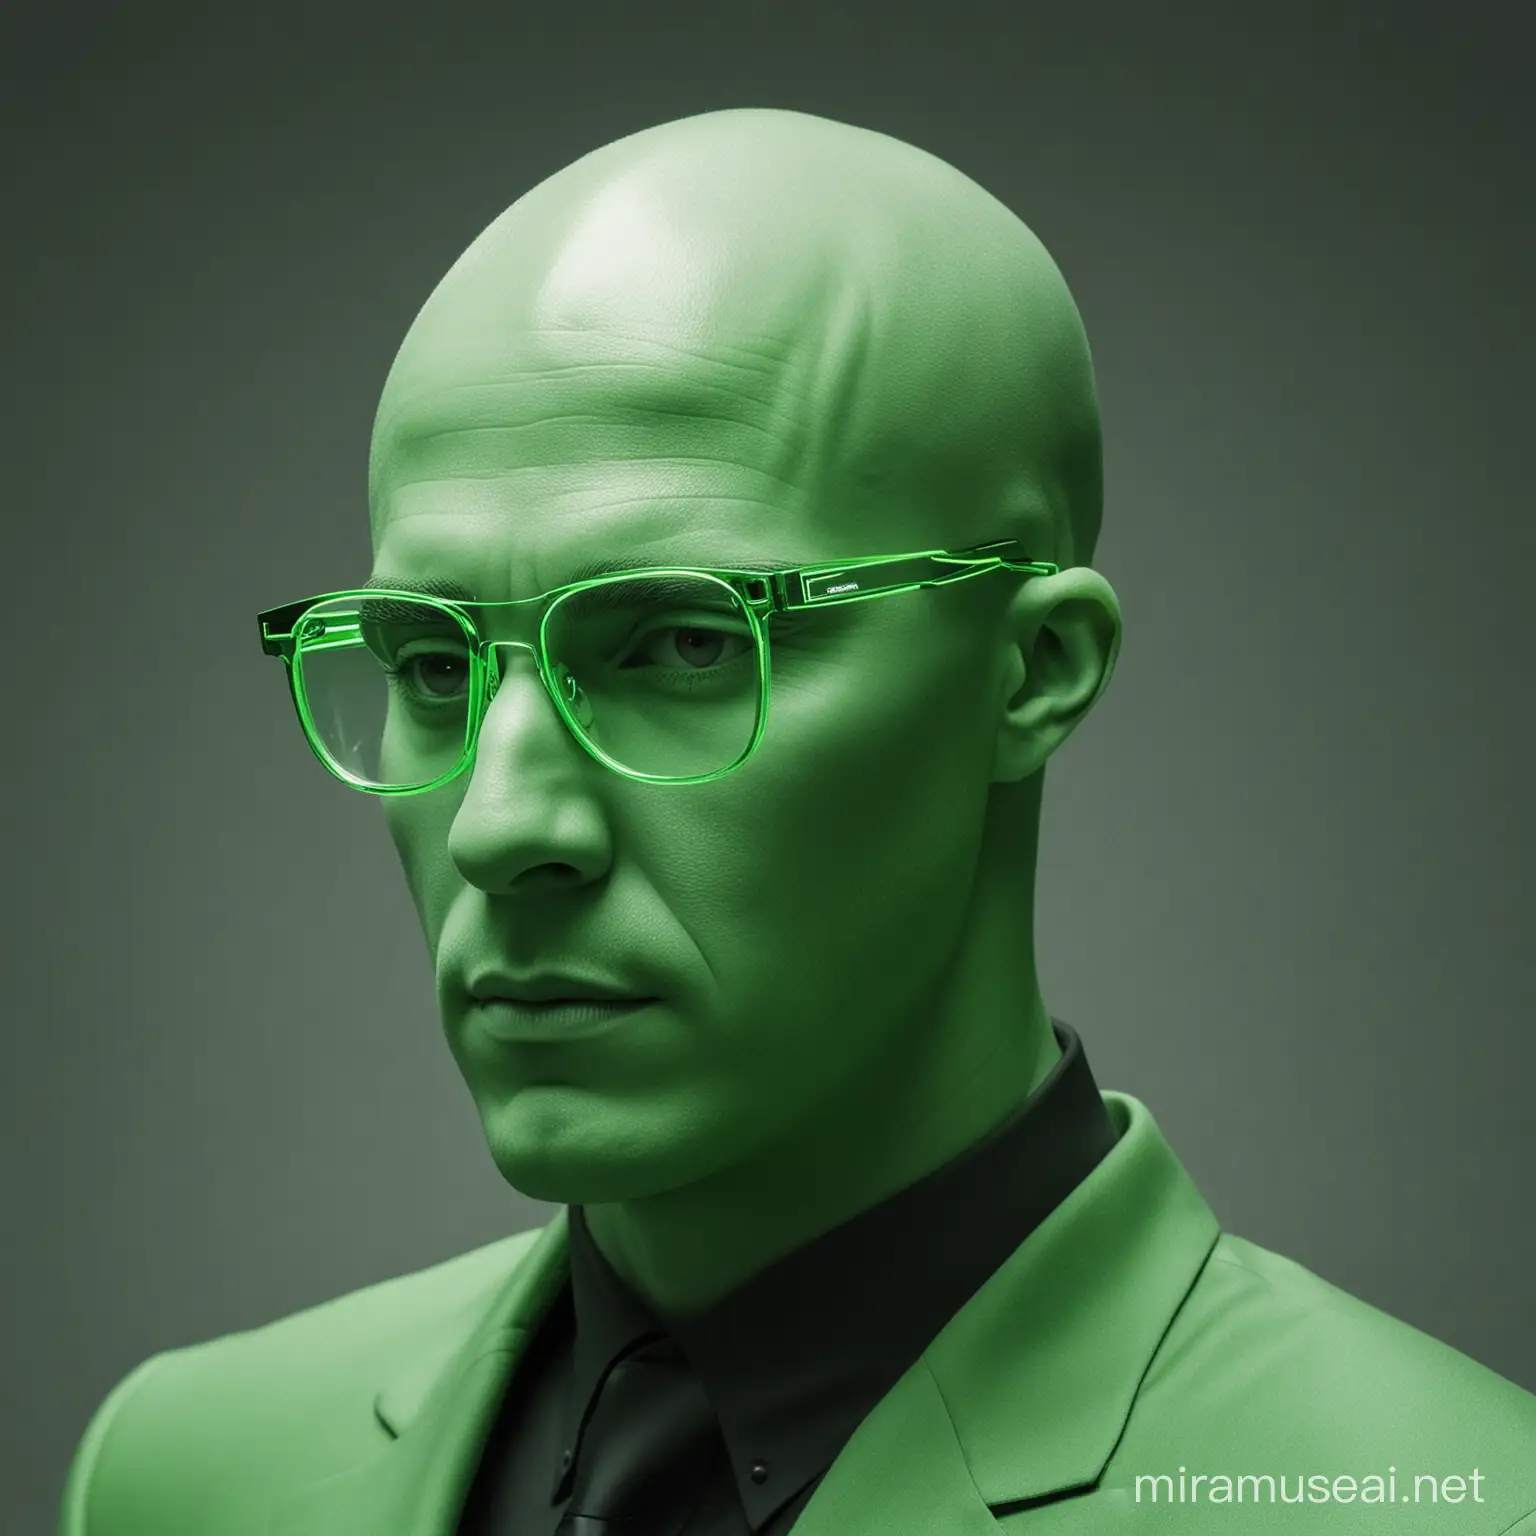 Futuristic Portrait Bald Man with Sharp Lines and Neon Green Glasses